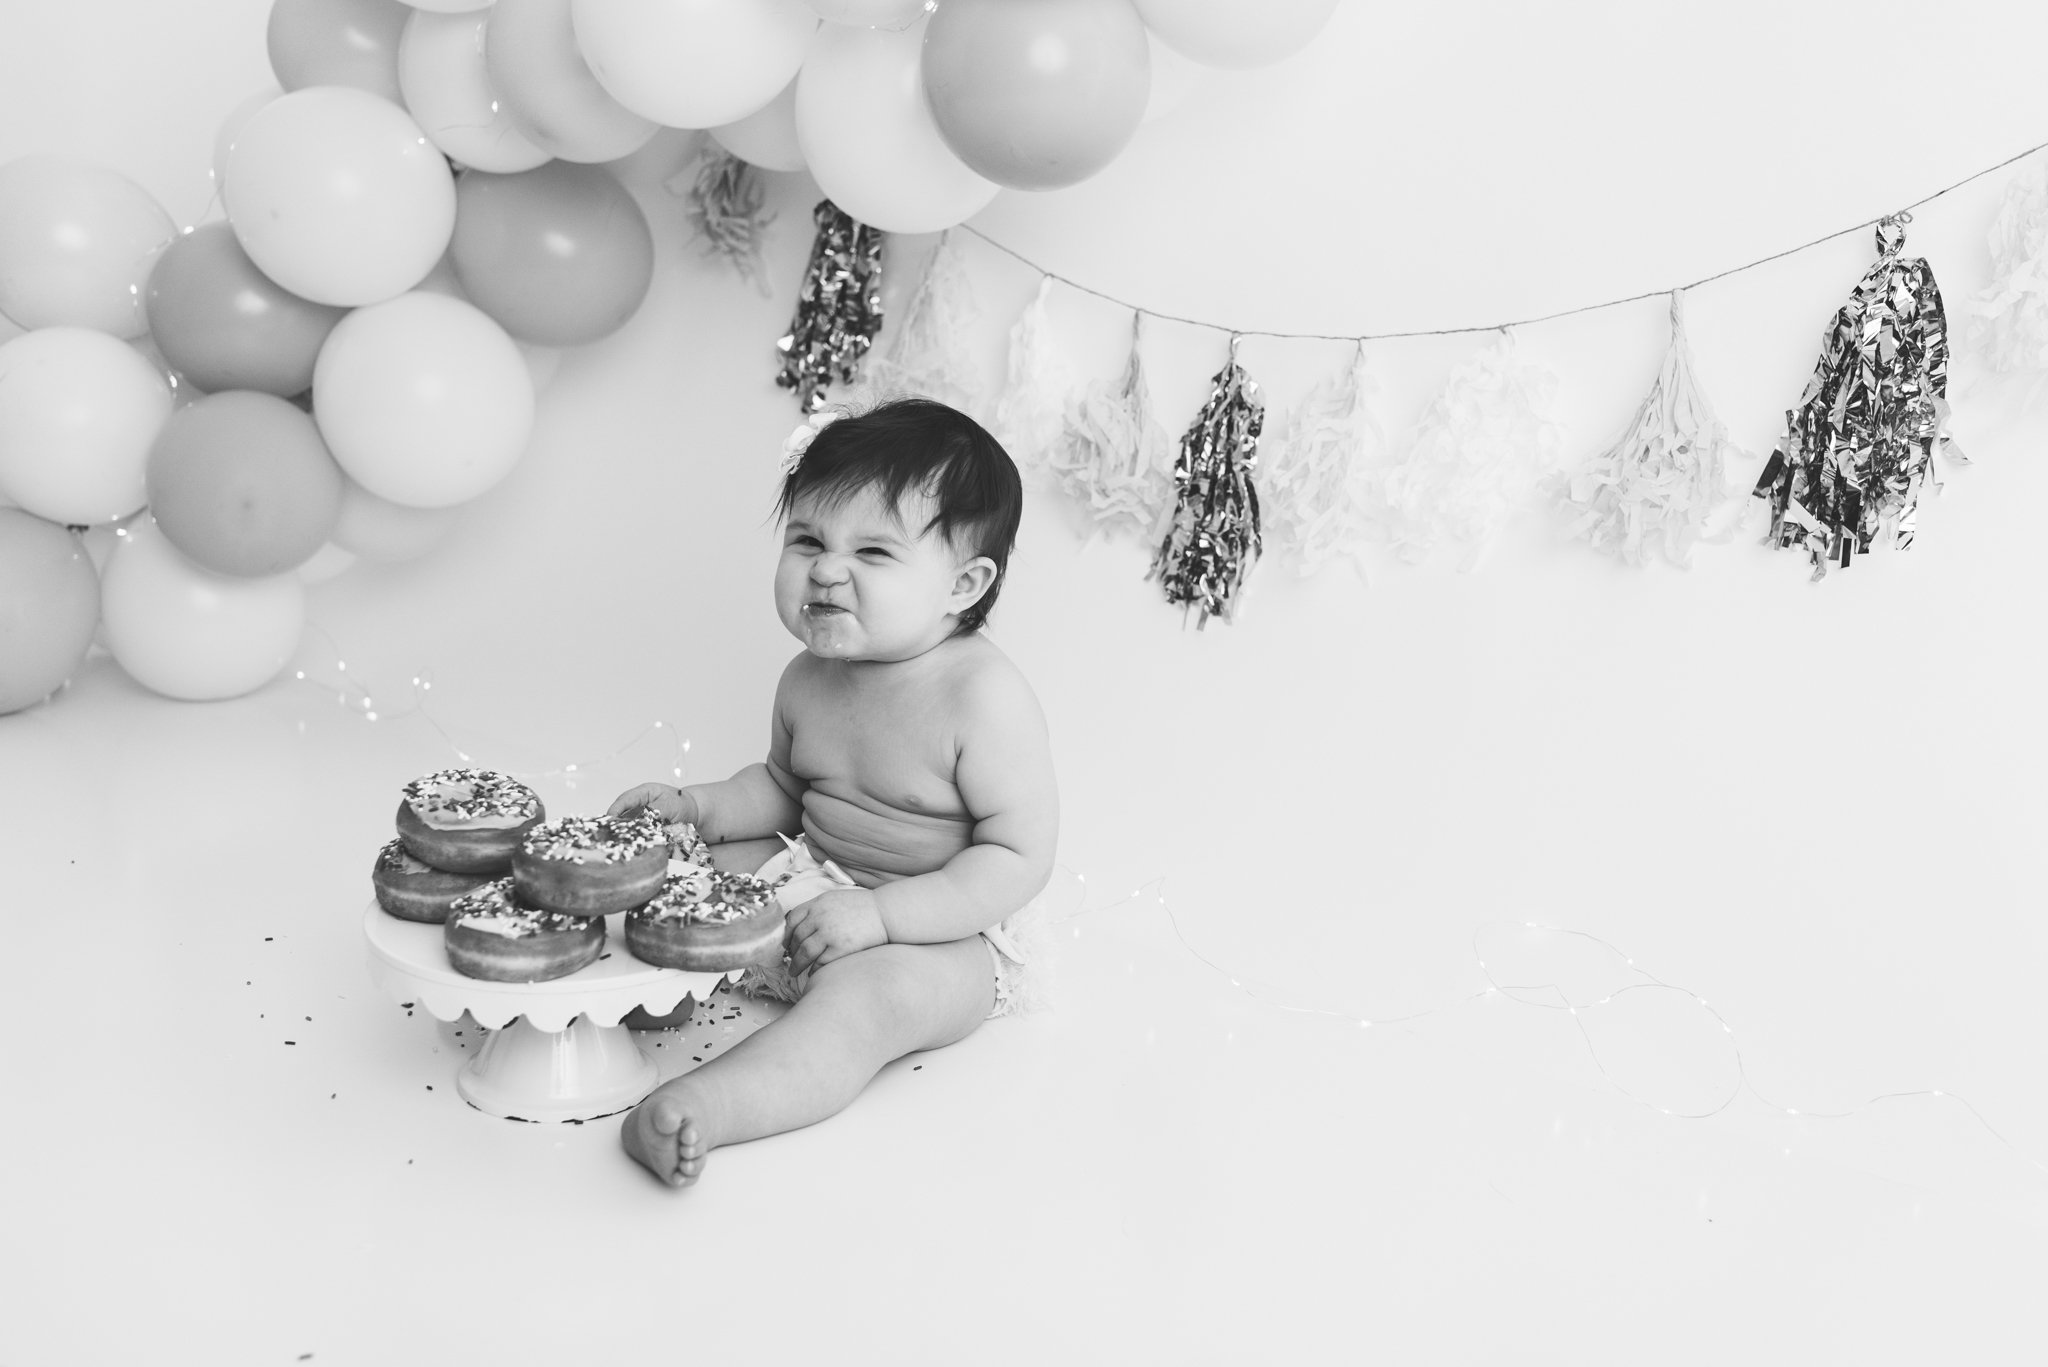 Pastel_Gold_Frist_Birthday_Girl_Smash_and_Splash_Session_Donuts_Studio_by_Erika_Child_and_Family_Photographer_for_Christie_Leigh_Photo_in_Cortland_OH_Ohio_Trumbull_County_009.jpg